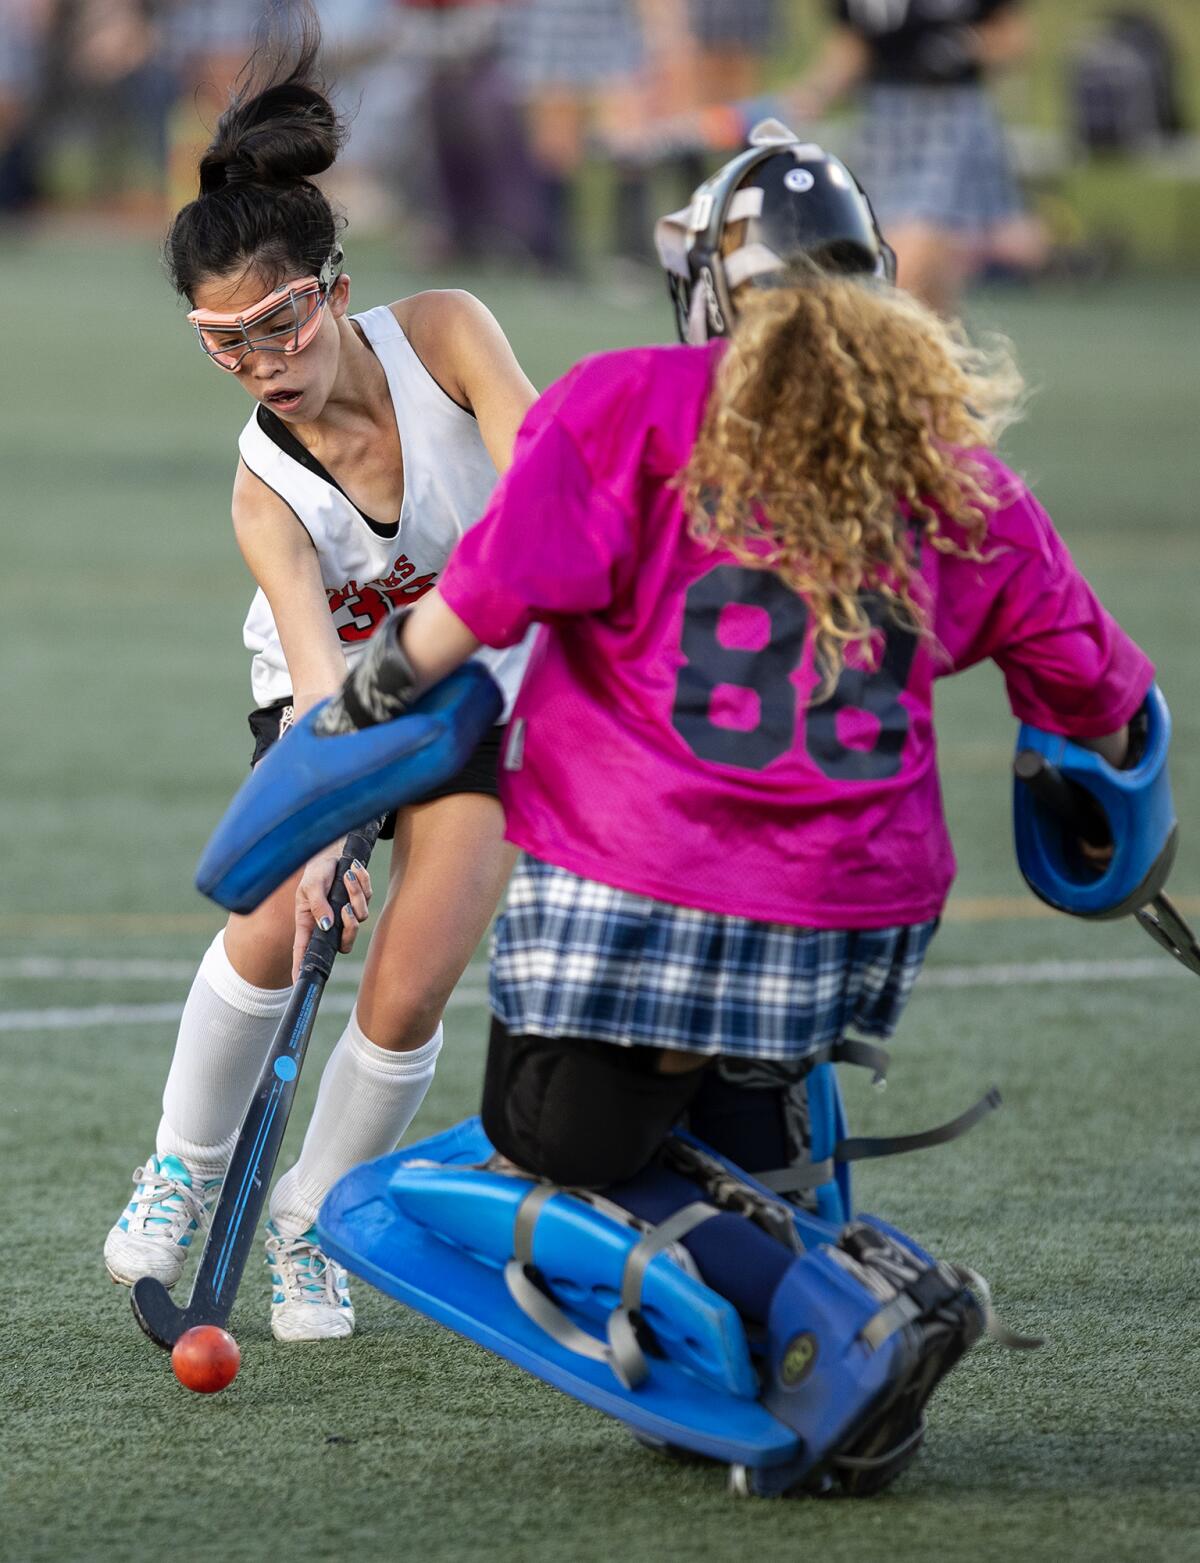 Newport Harbor's Cadence Cockrell challenges Huntington Beach's Anela Kaye during a field hockey match on Friday.